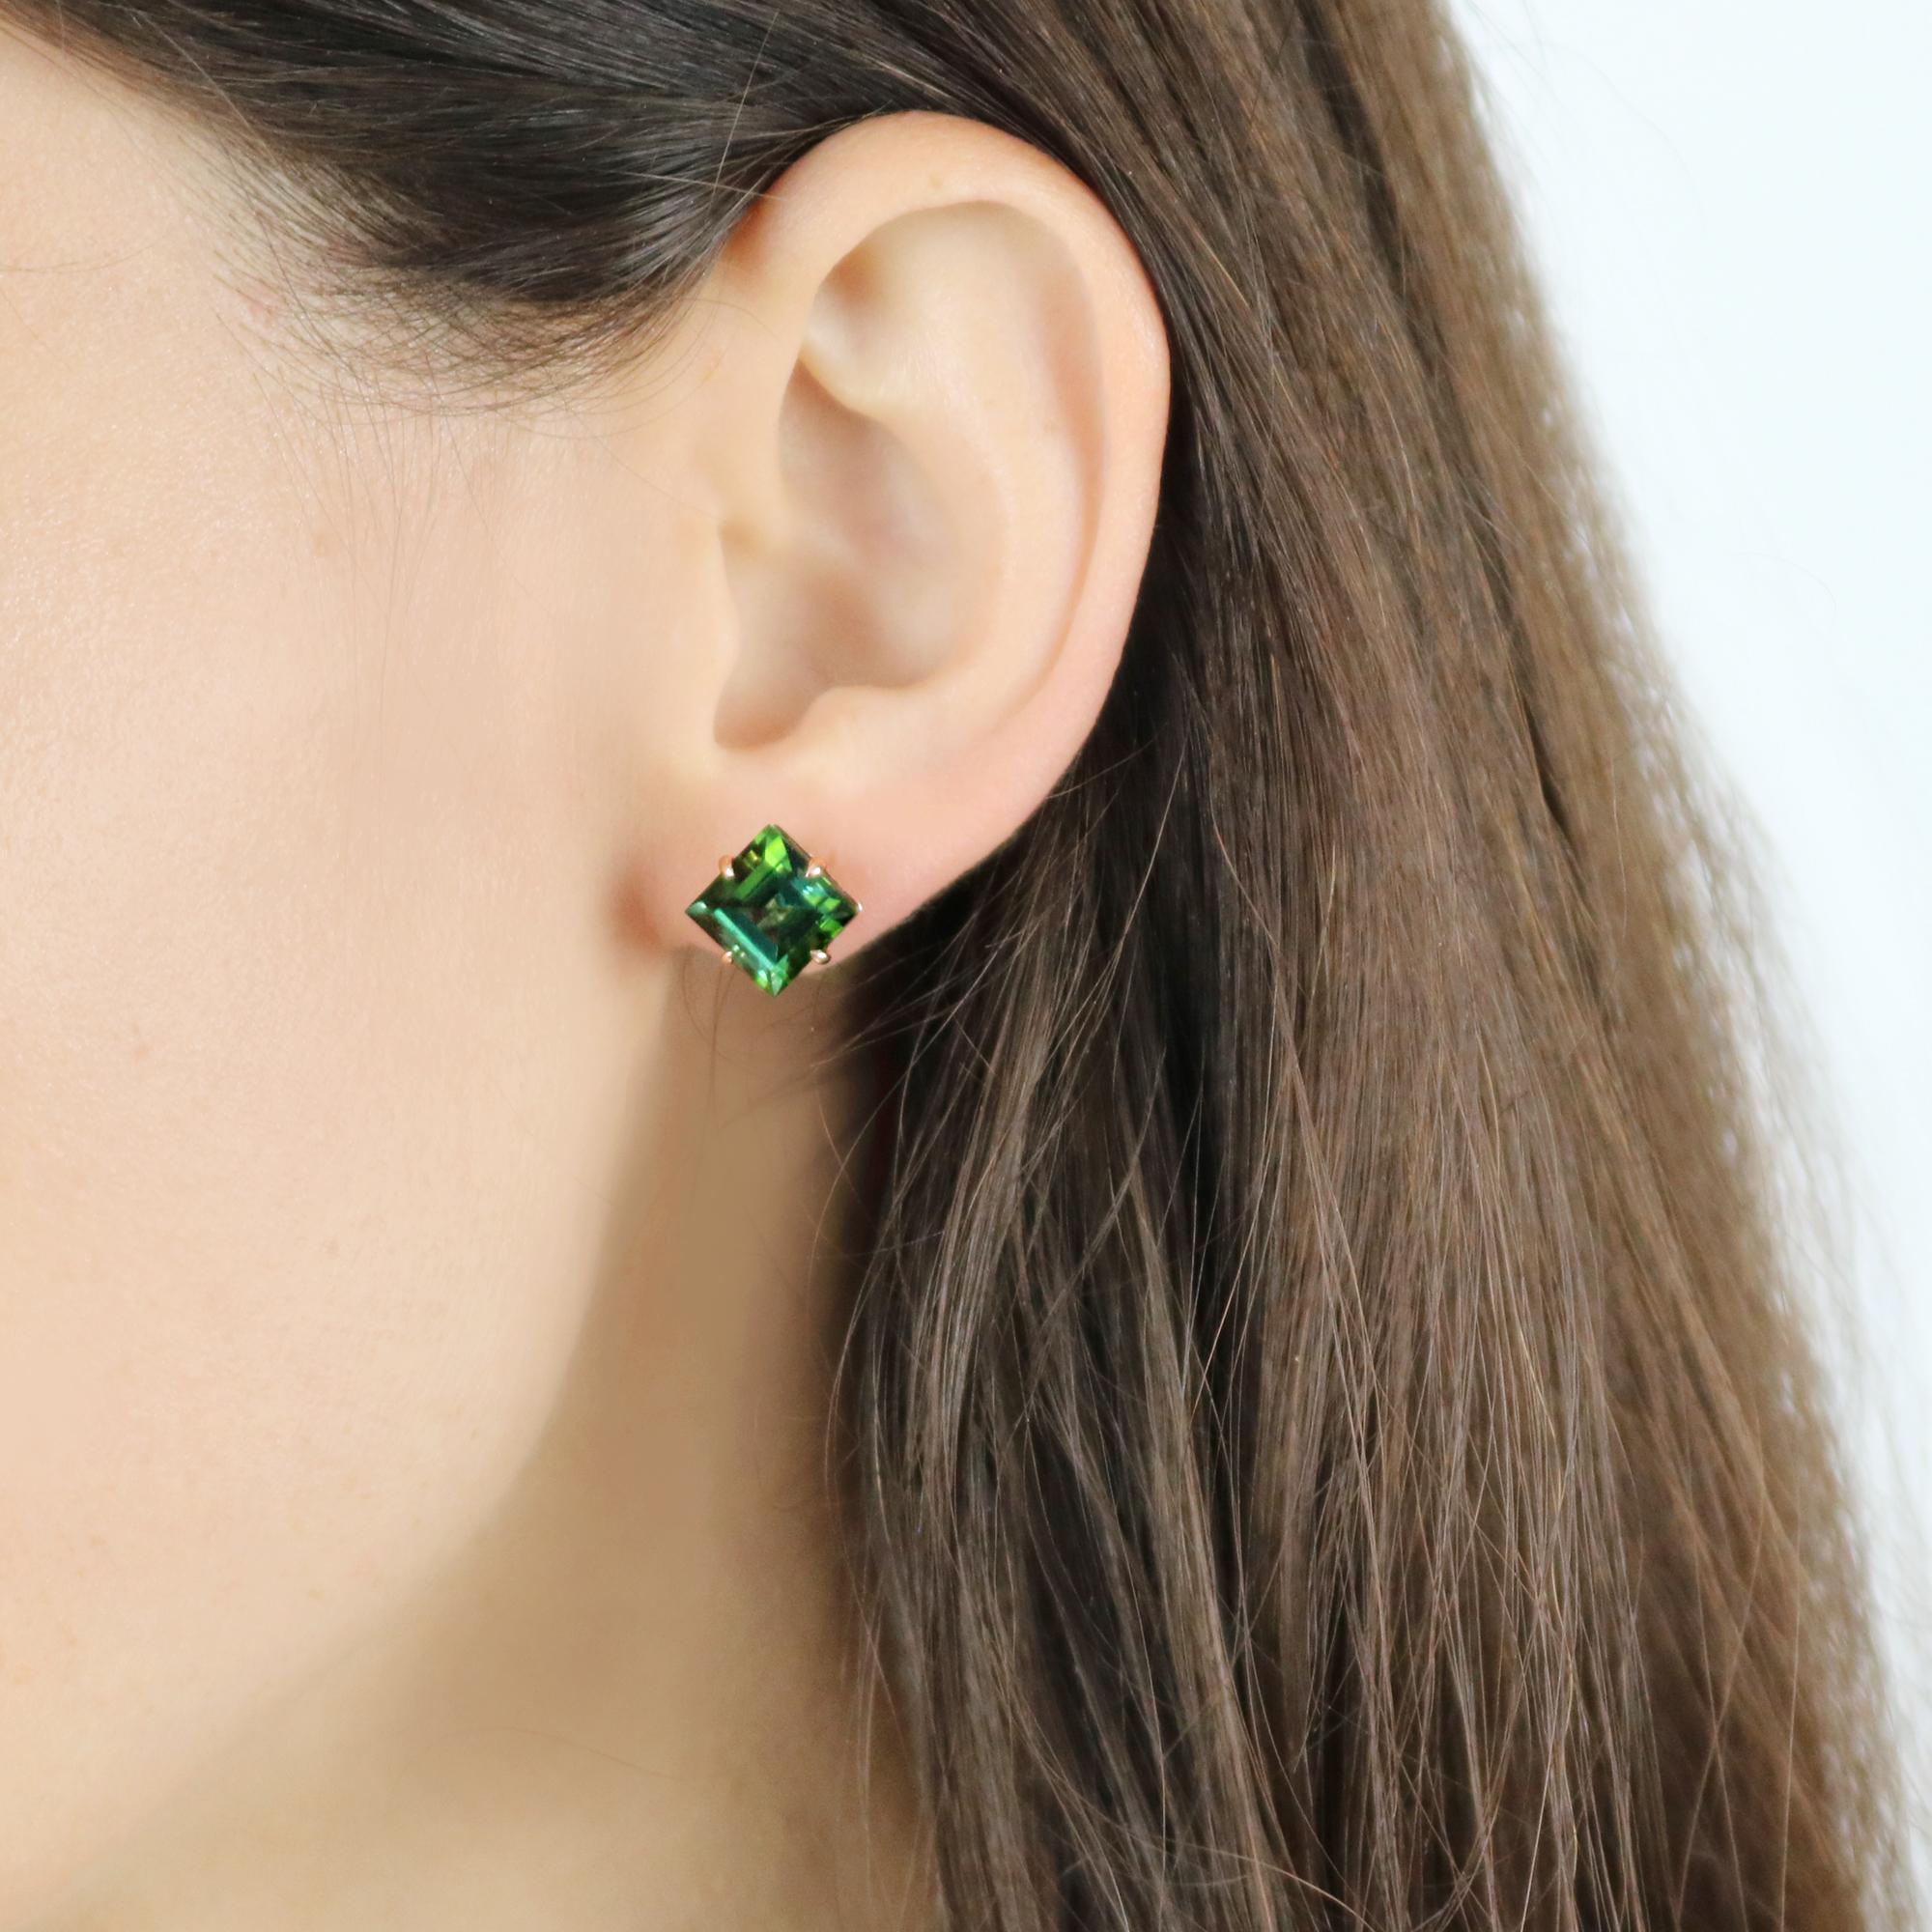 One of a kind emerald cut green tourmaline studs set in 18kt rose gold.

Sparkling, bright and lightweight, this pair of 18kt rose gold studs are meant for everyday use as an unexpected alternative to a classic pair of diamond studs.

The